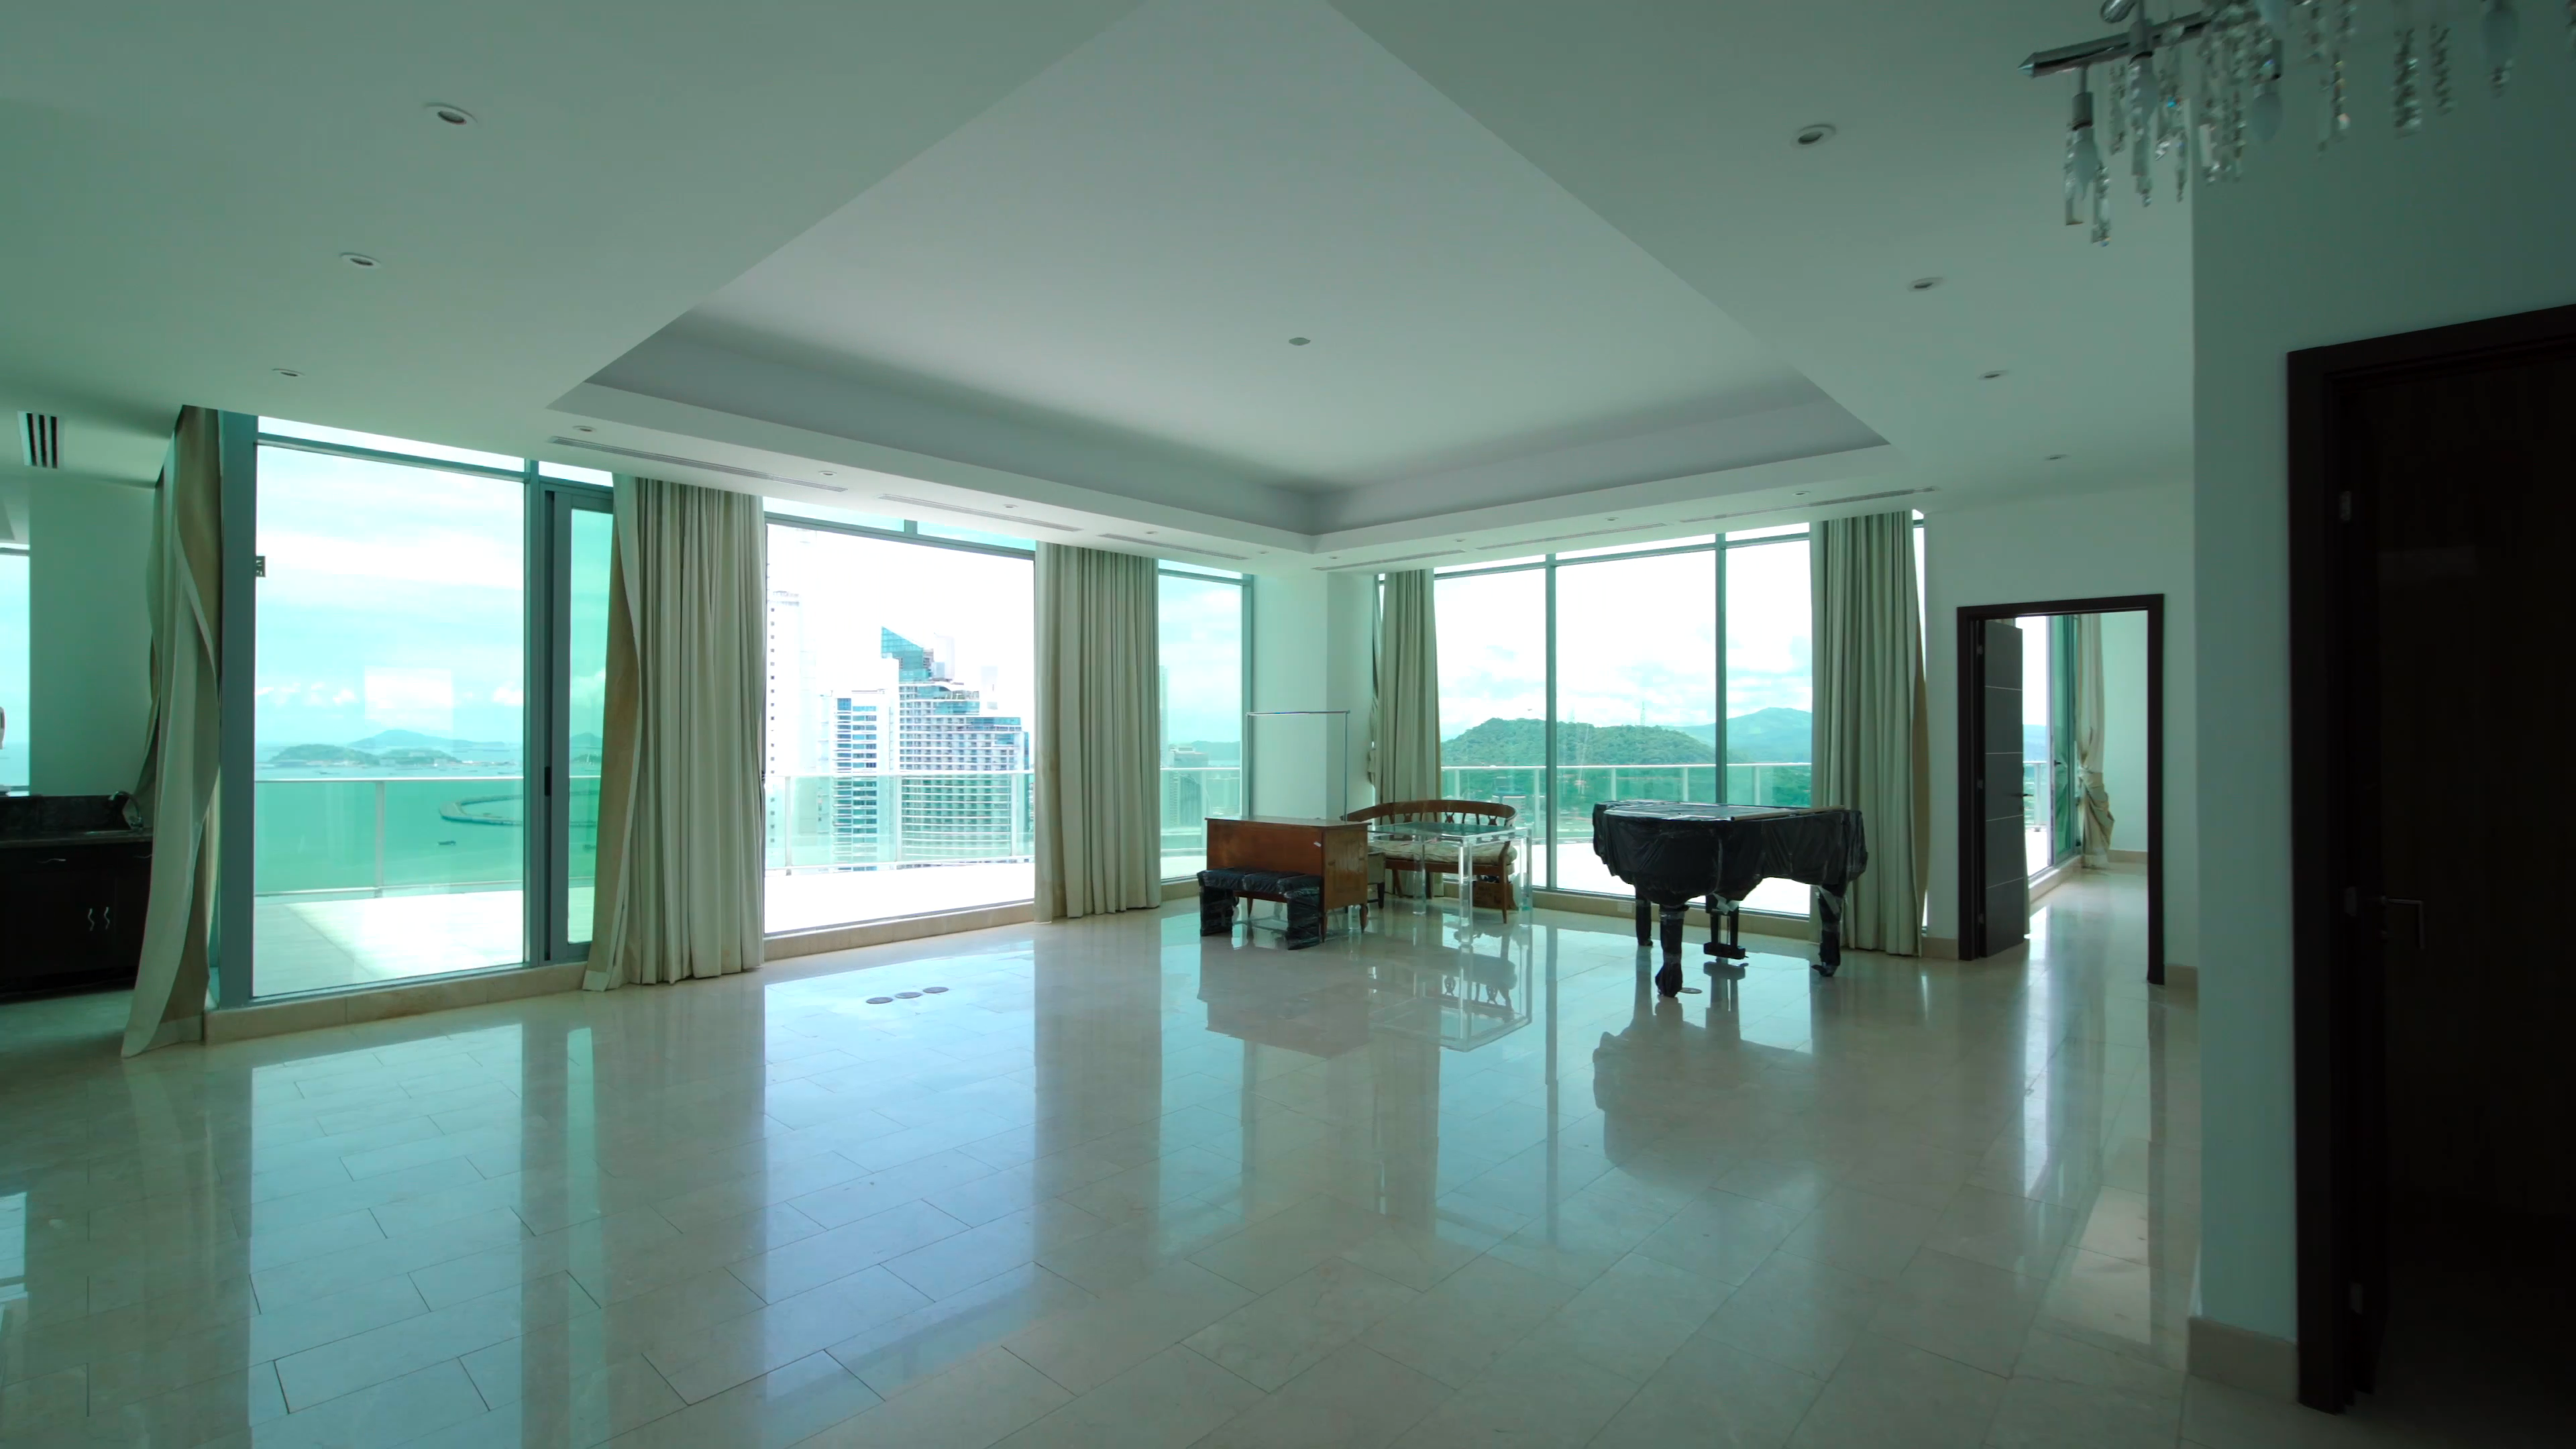 Outstanding Penthouse at P.H. Allure: Spacious Luxury with Panoramic Views | Panama Listing Service ID: PLS-19910